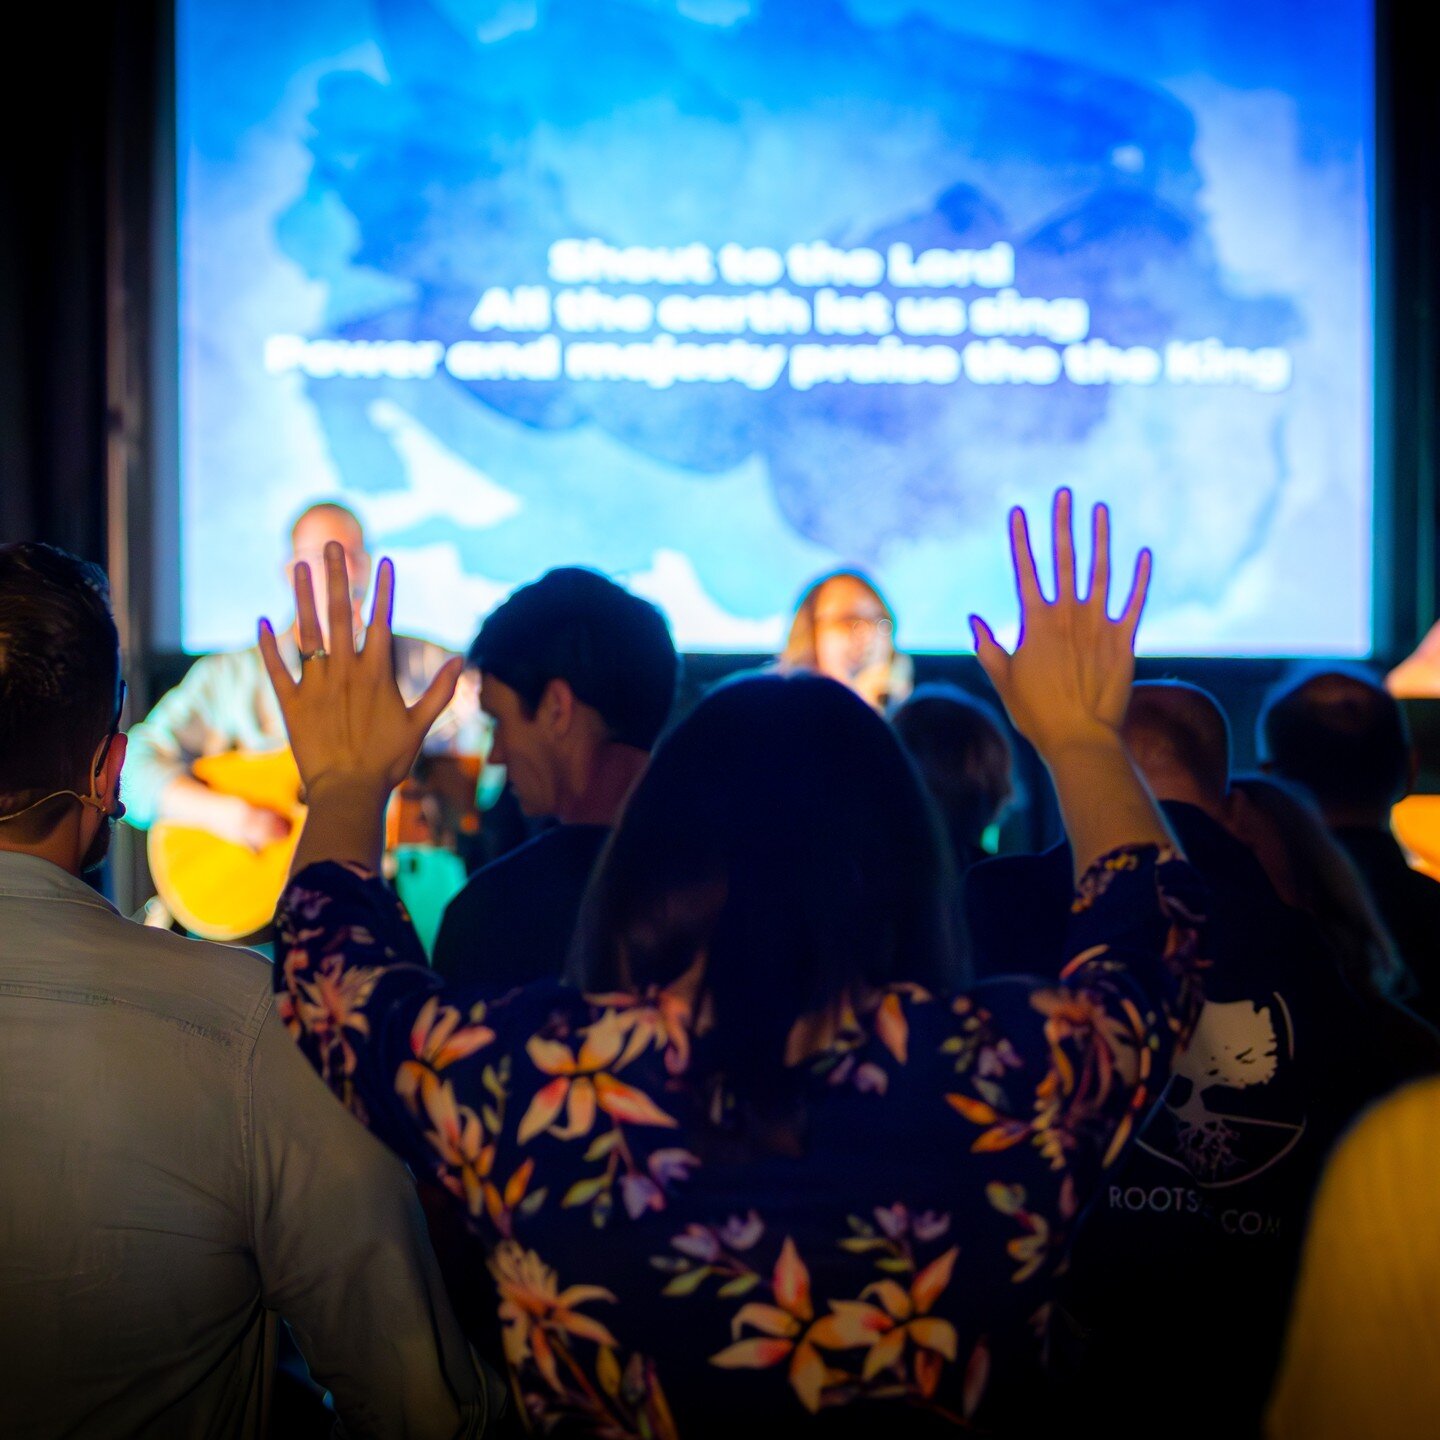 This Easter was a joyful gathering celebrating the hope we have through Jesus' resurrection from the dead. We hope you can join us again this Sunday at 10:30am!